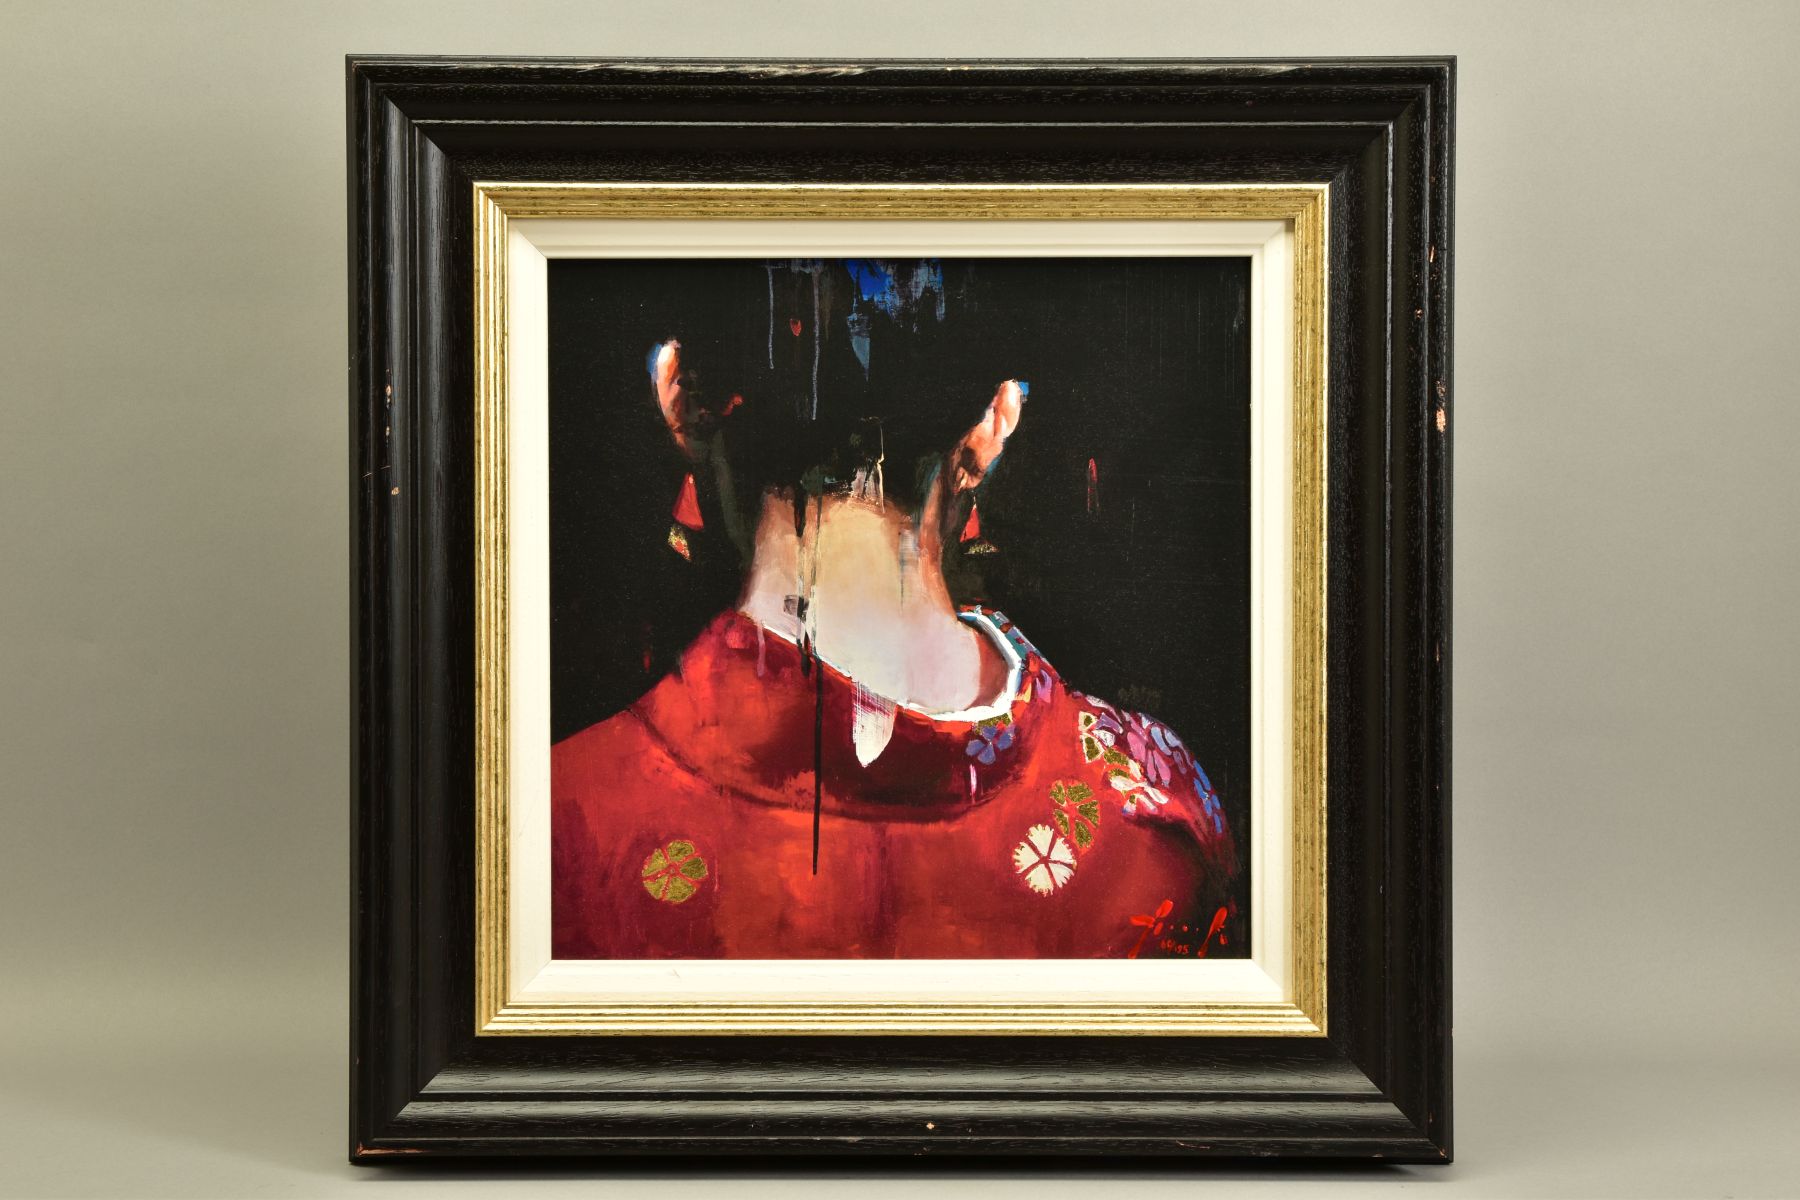 CHRISTIAN HOOK (GIBRALTER 1971), 'RED KIMONO', a signed limited edition print of a Japanese